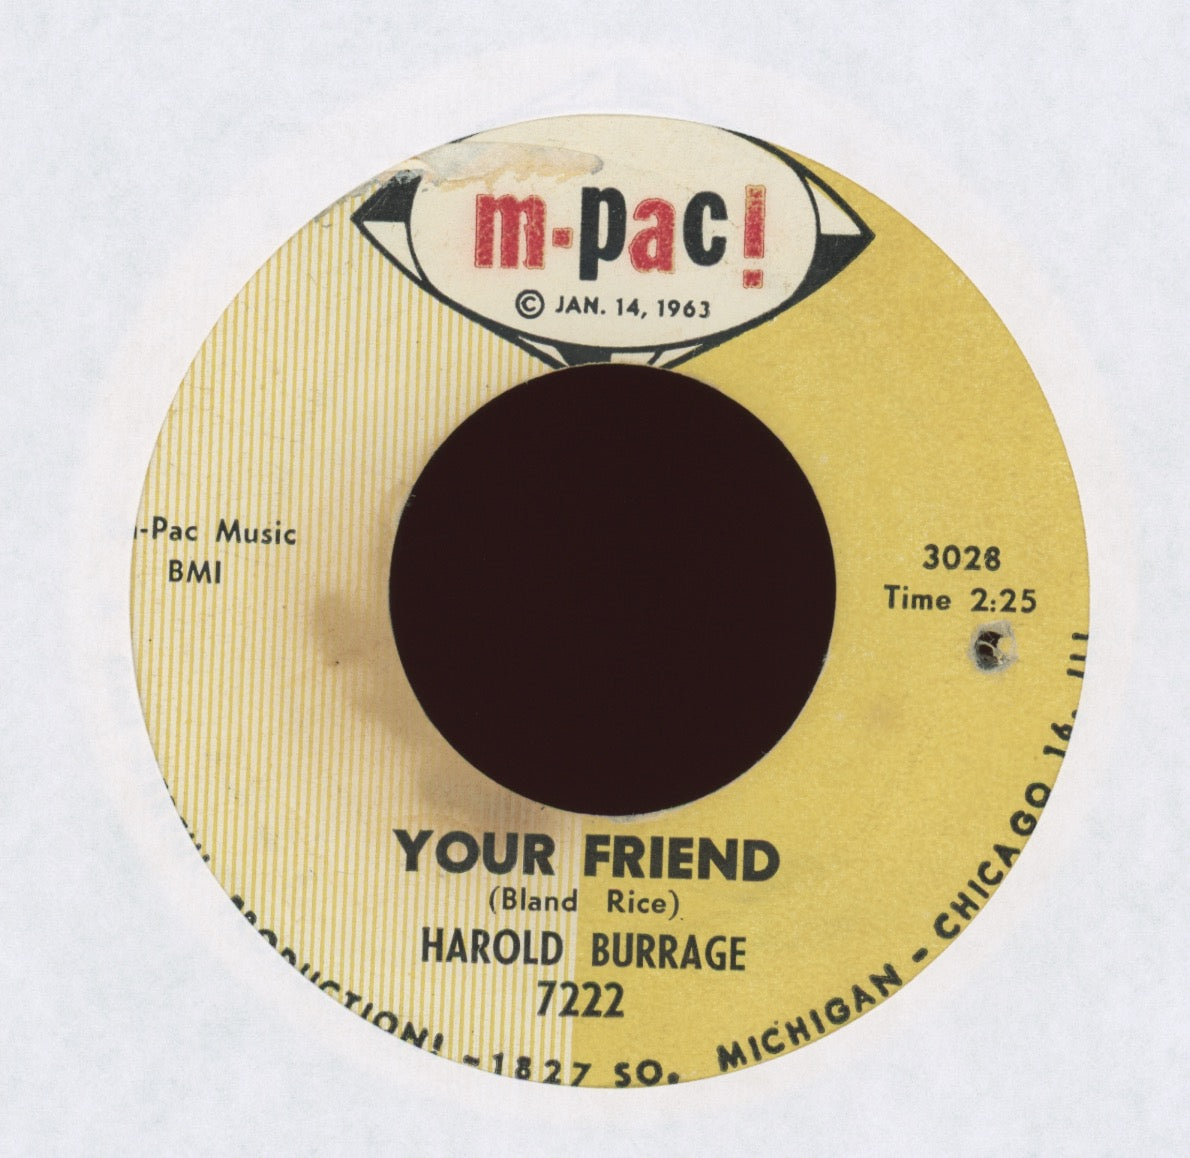 Harold Burrage - Your Friend on M-pac